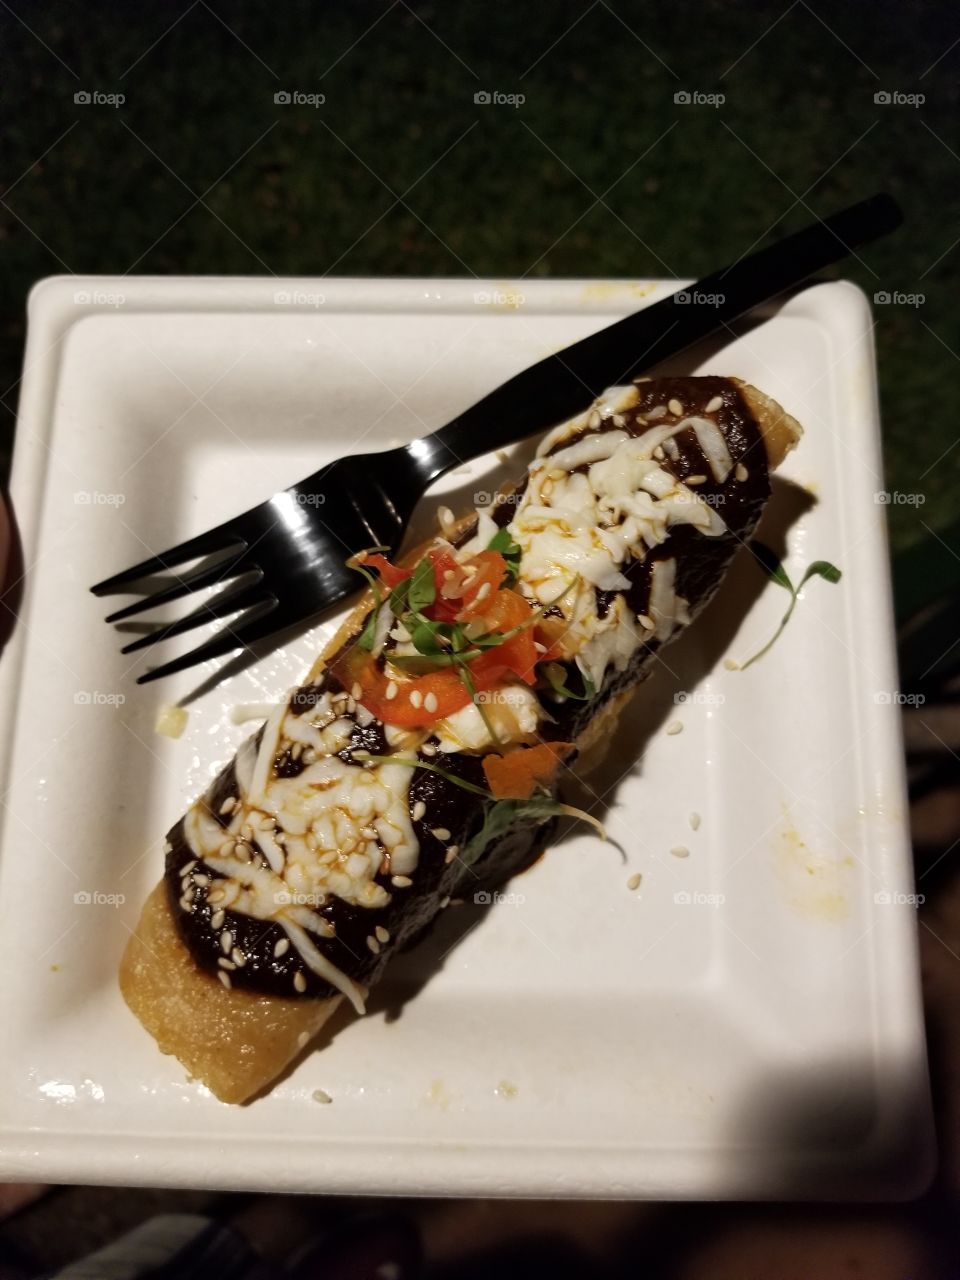 Enchilada from Epcot